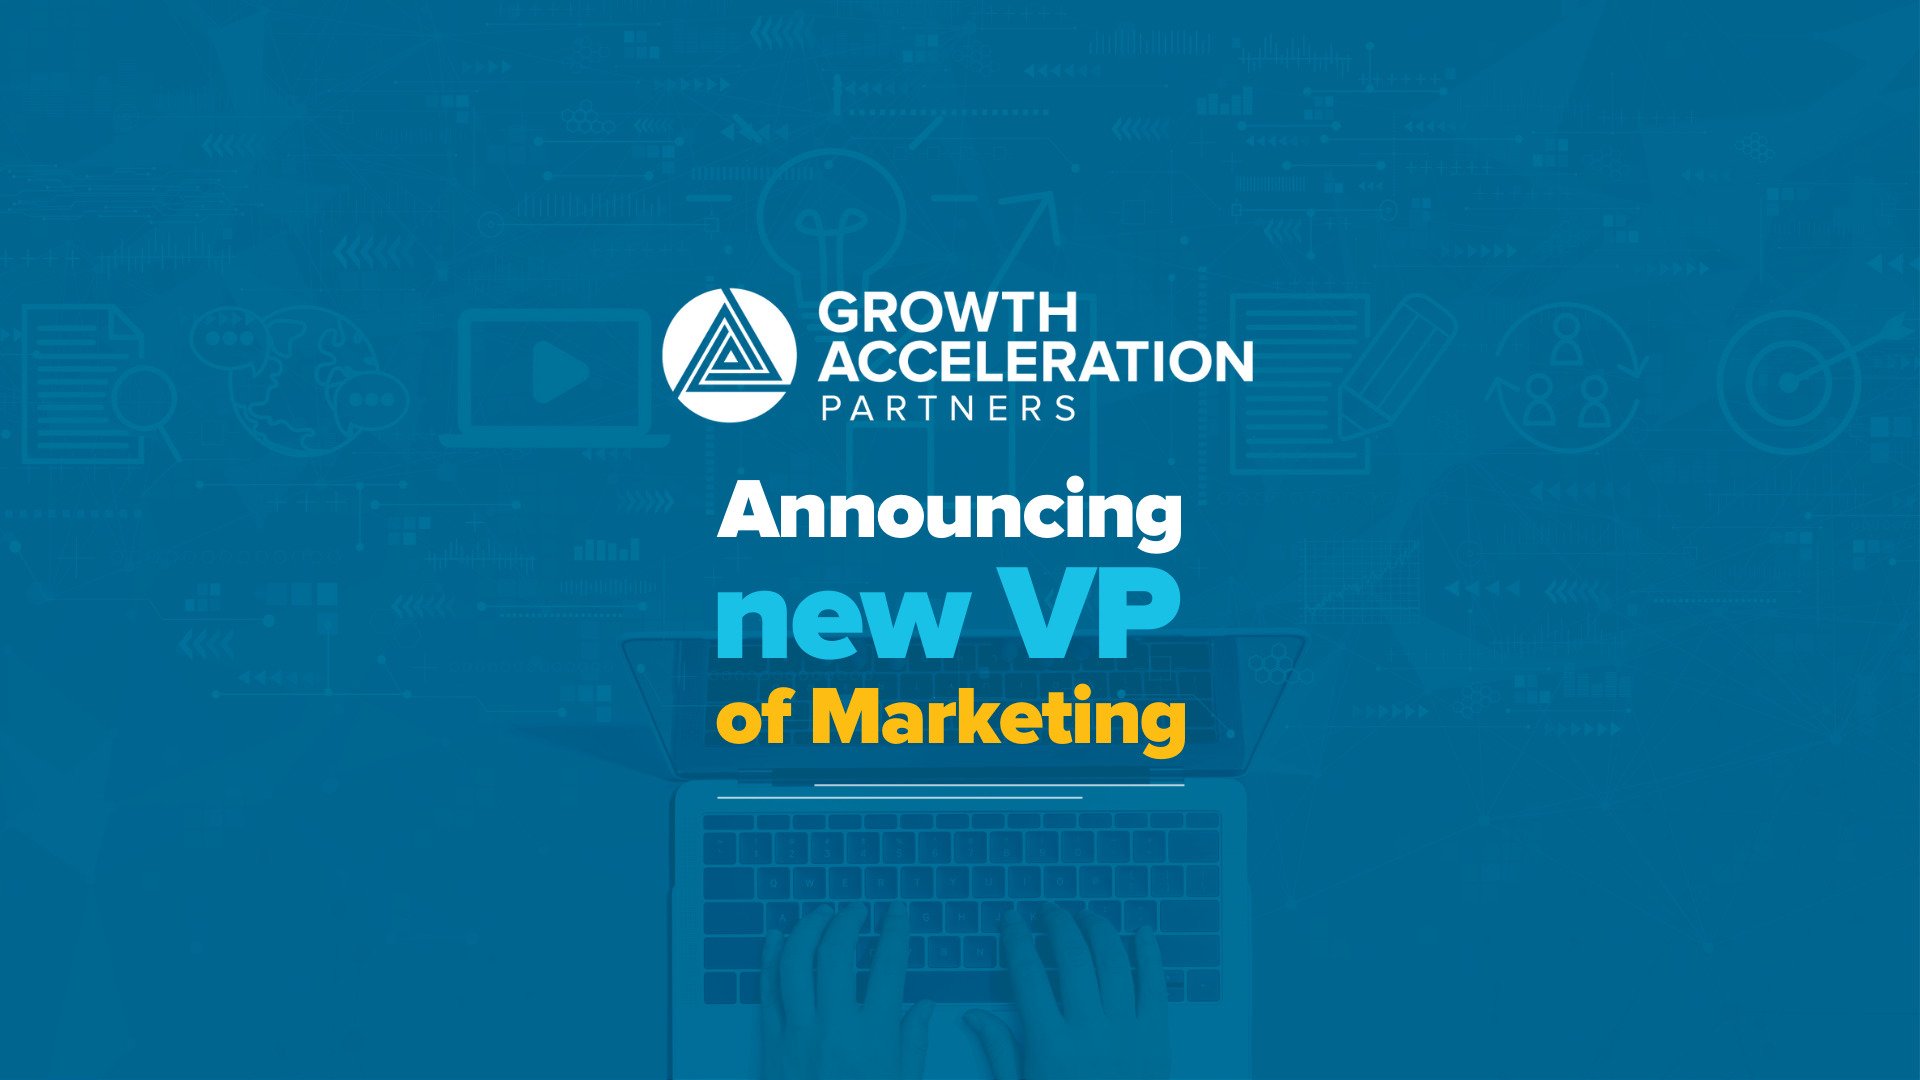 Growth Acceleration Partners Announces New VP of Marketing